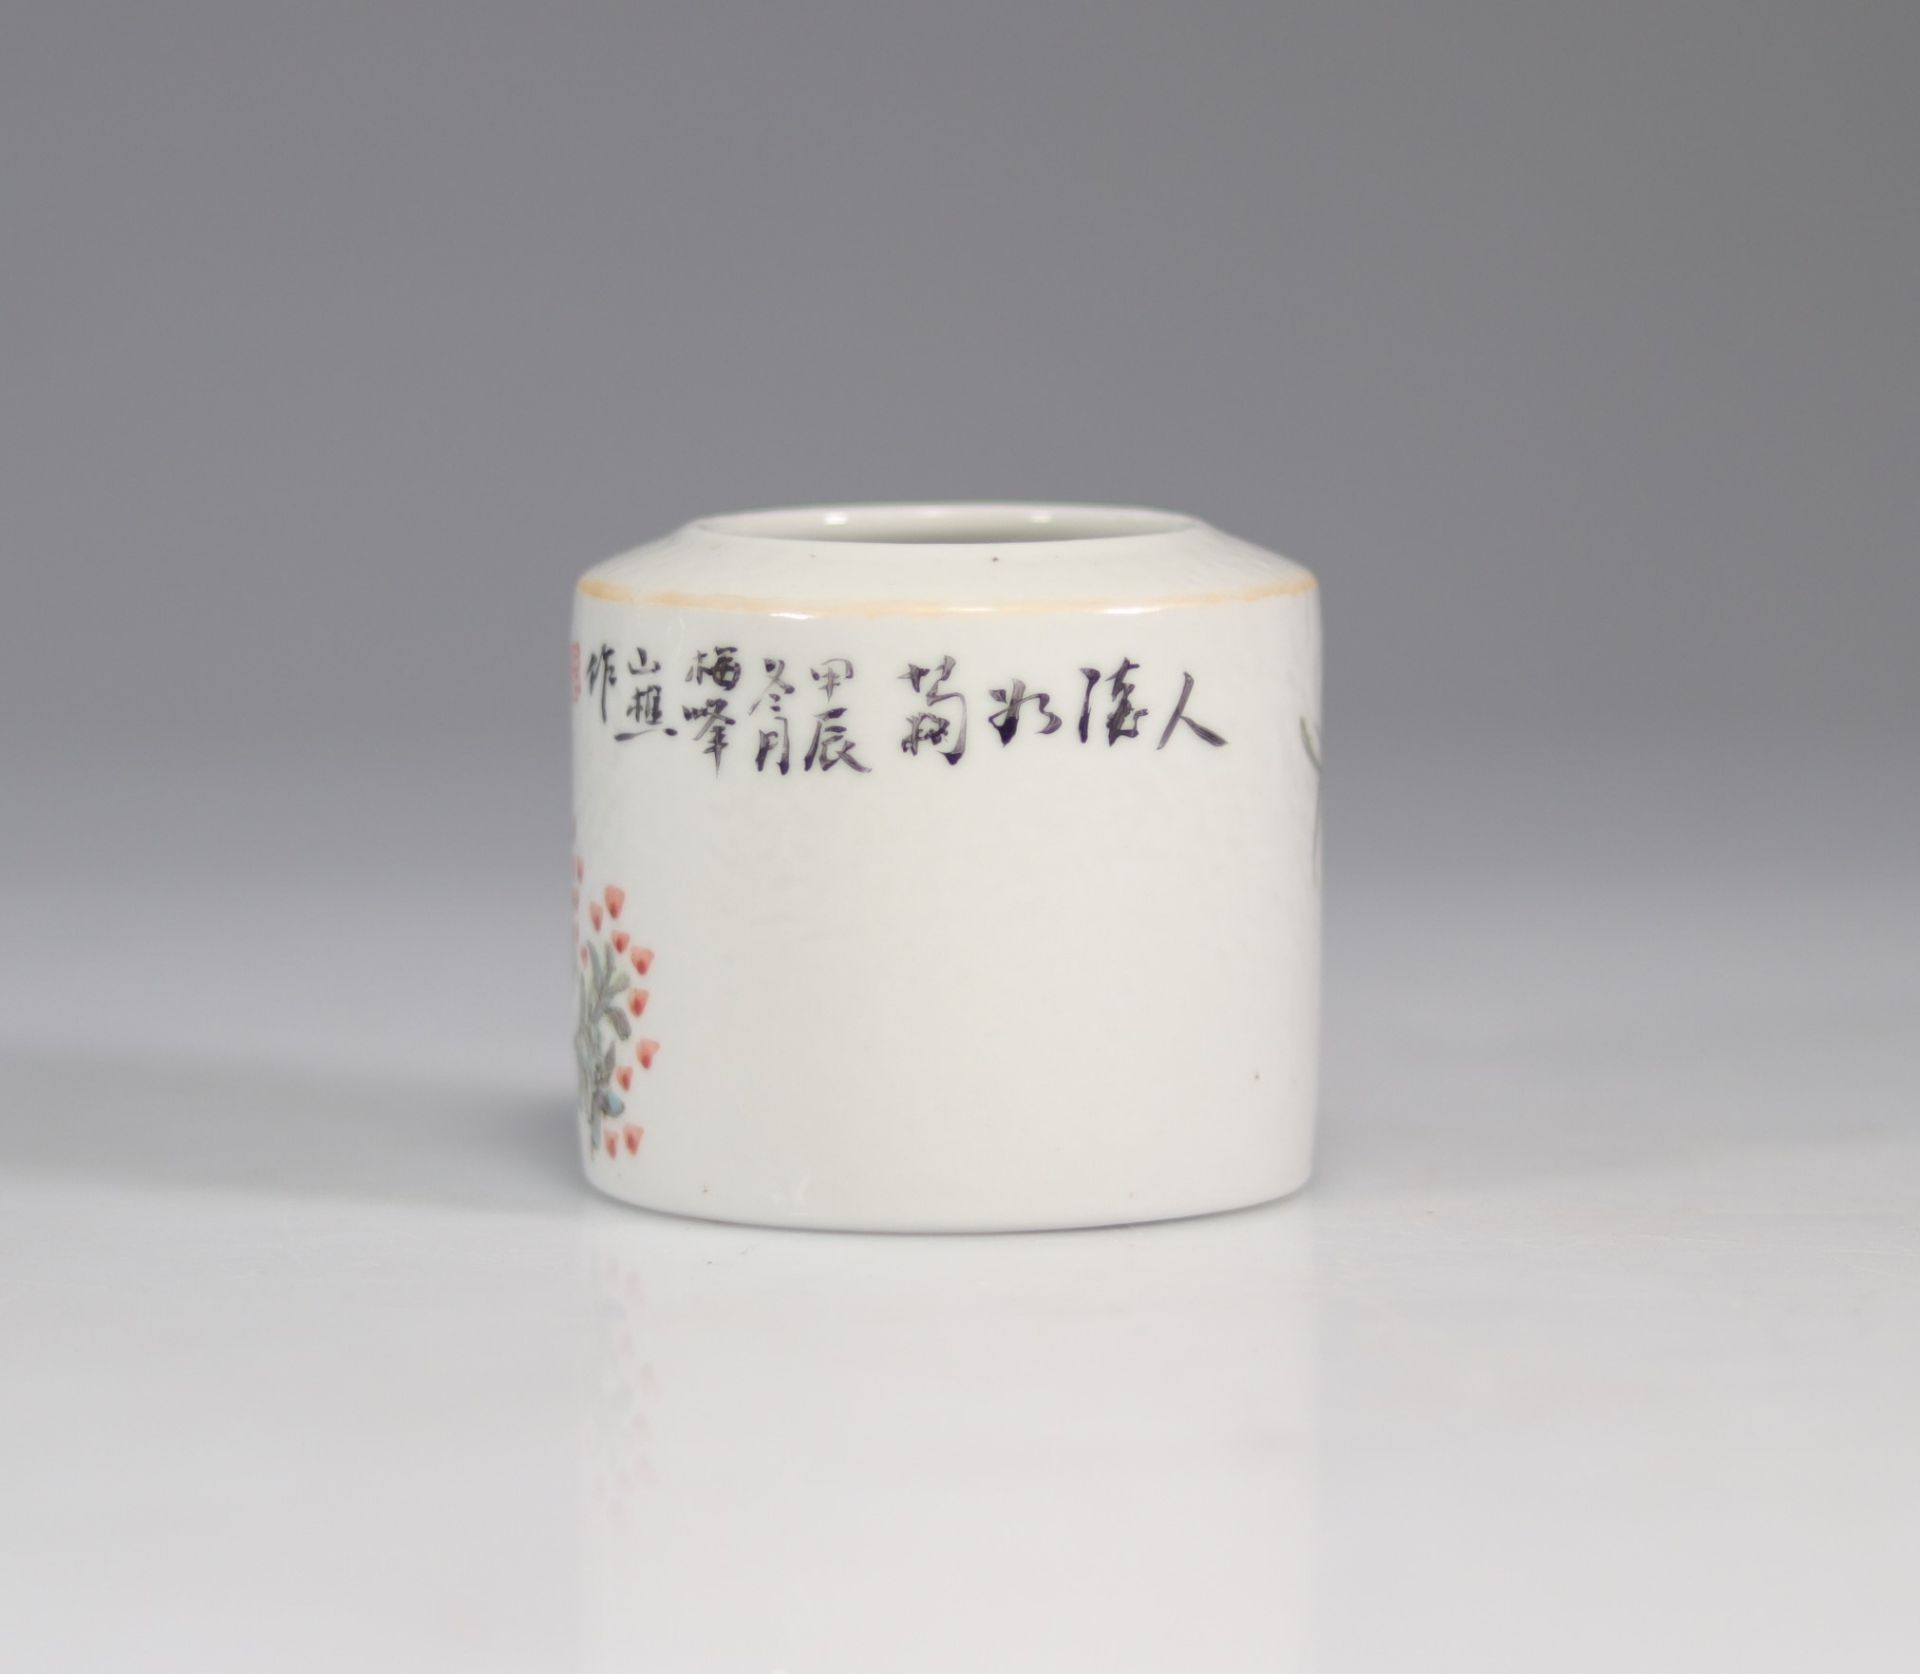 Brush holder in qianjiang cai porcelain with bird decor - Image 4 of 6